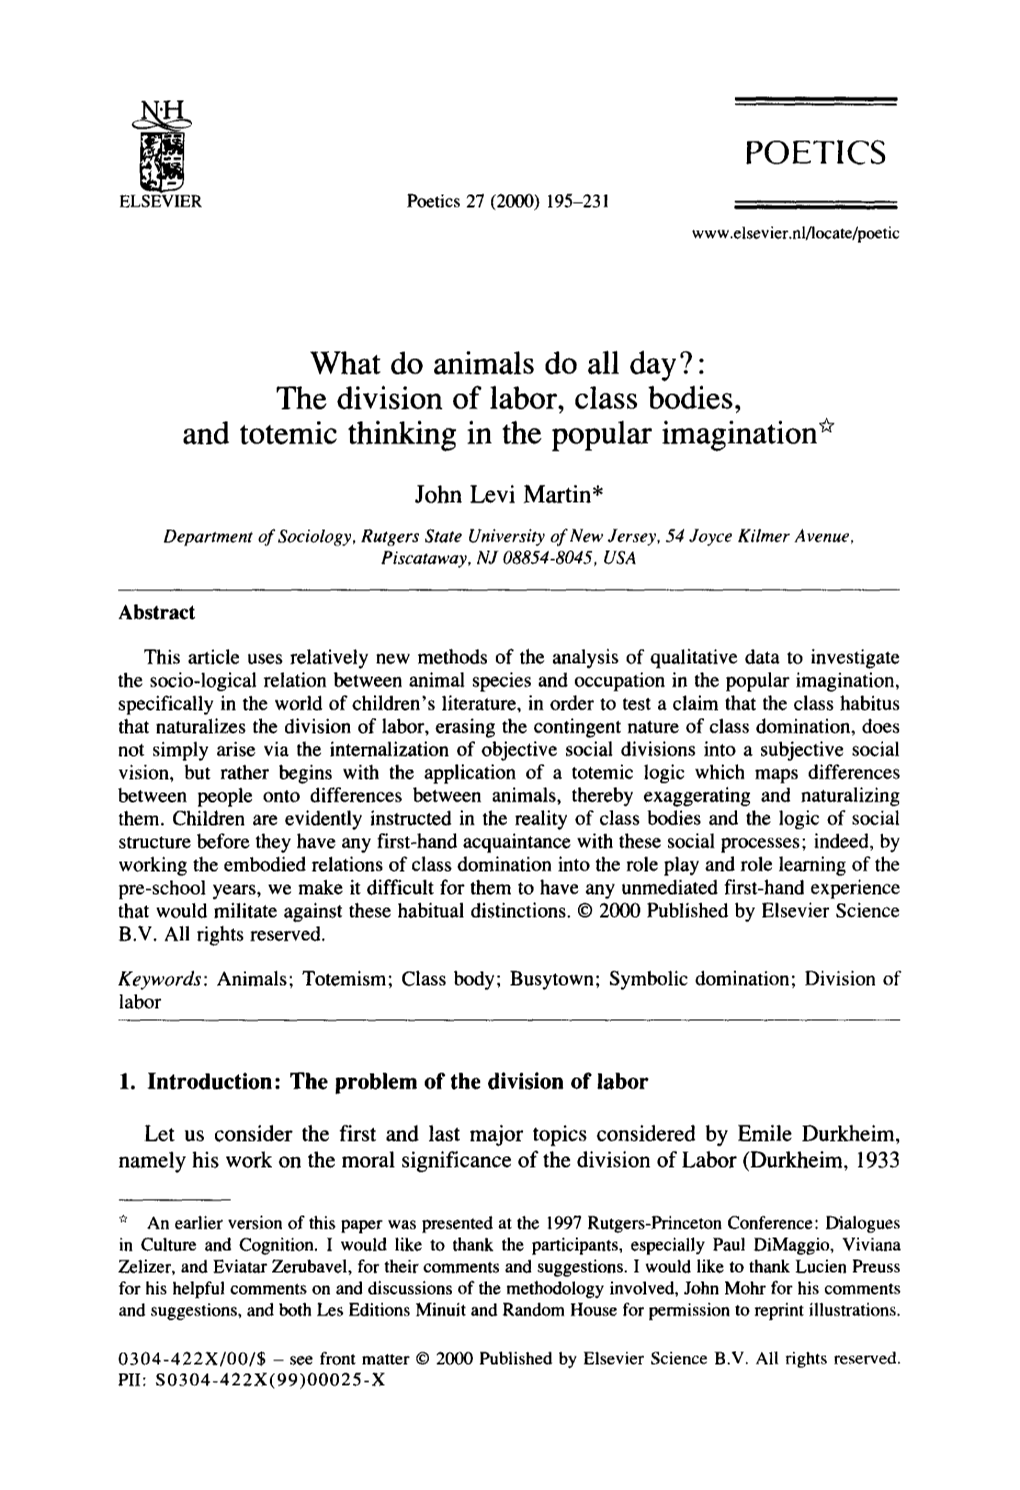 What Do Animals Do All Day?" the Division of Labor, Class Bodies, and Totemic Thinking in the Popular Imagination *